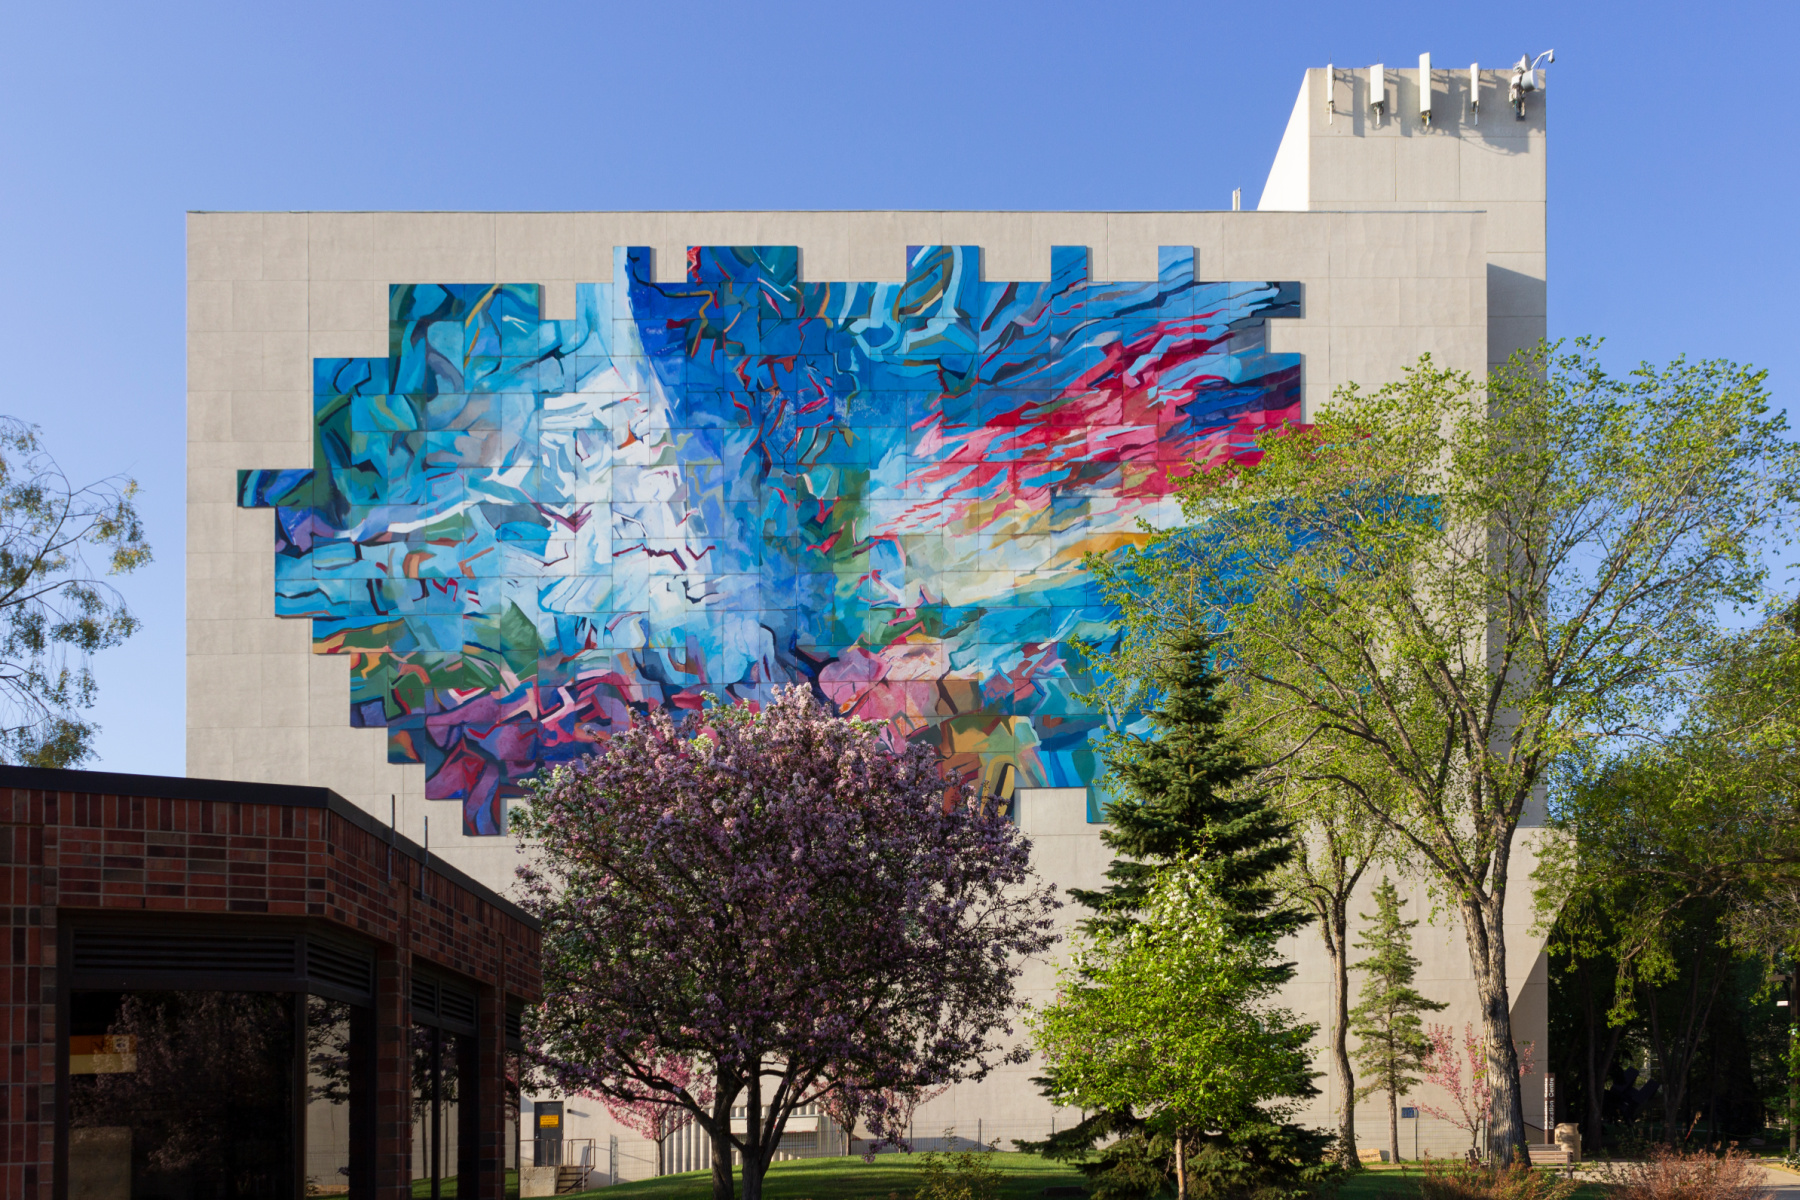 University of Alberta Faculty of Education Building exterior with mural